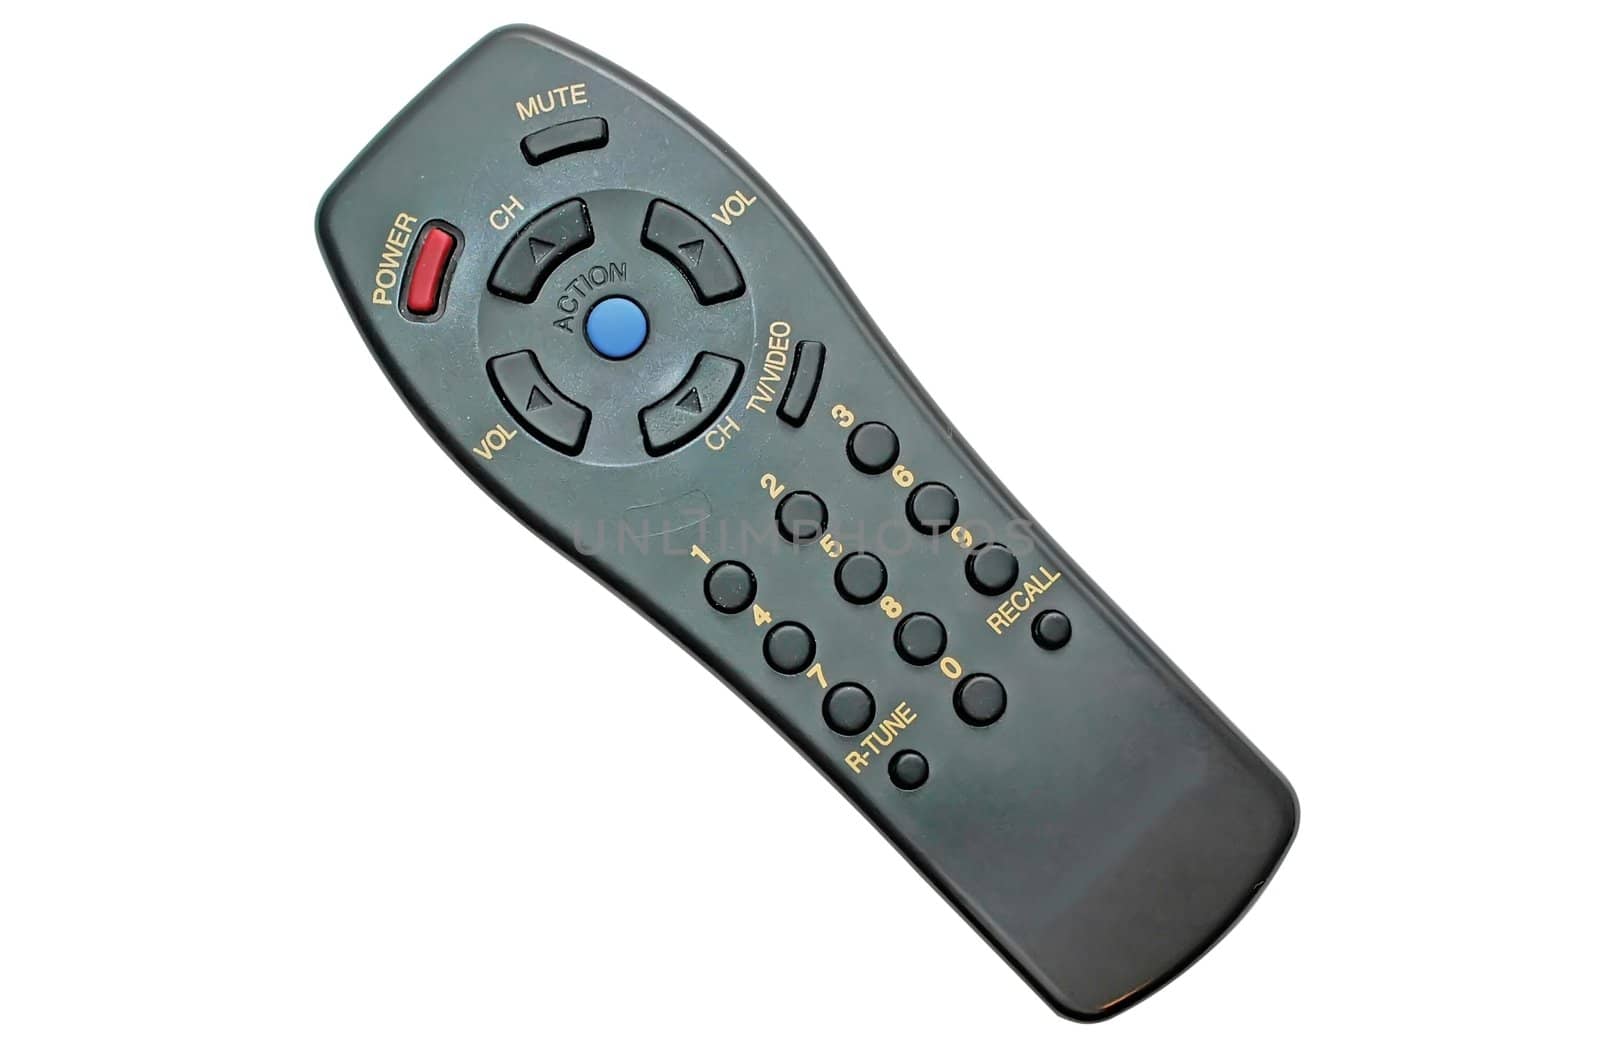 Tv remote control with clipping path.